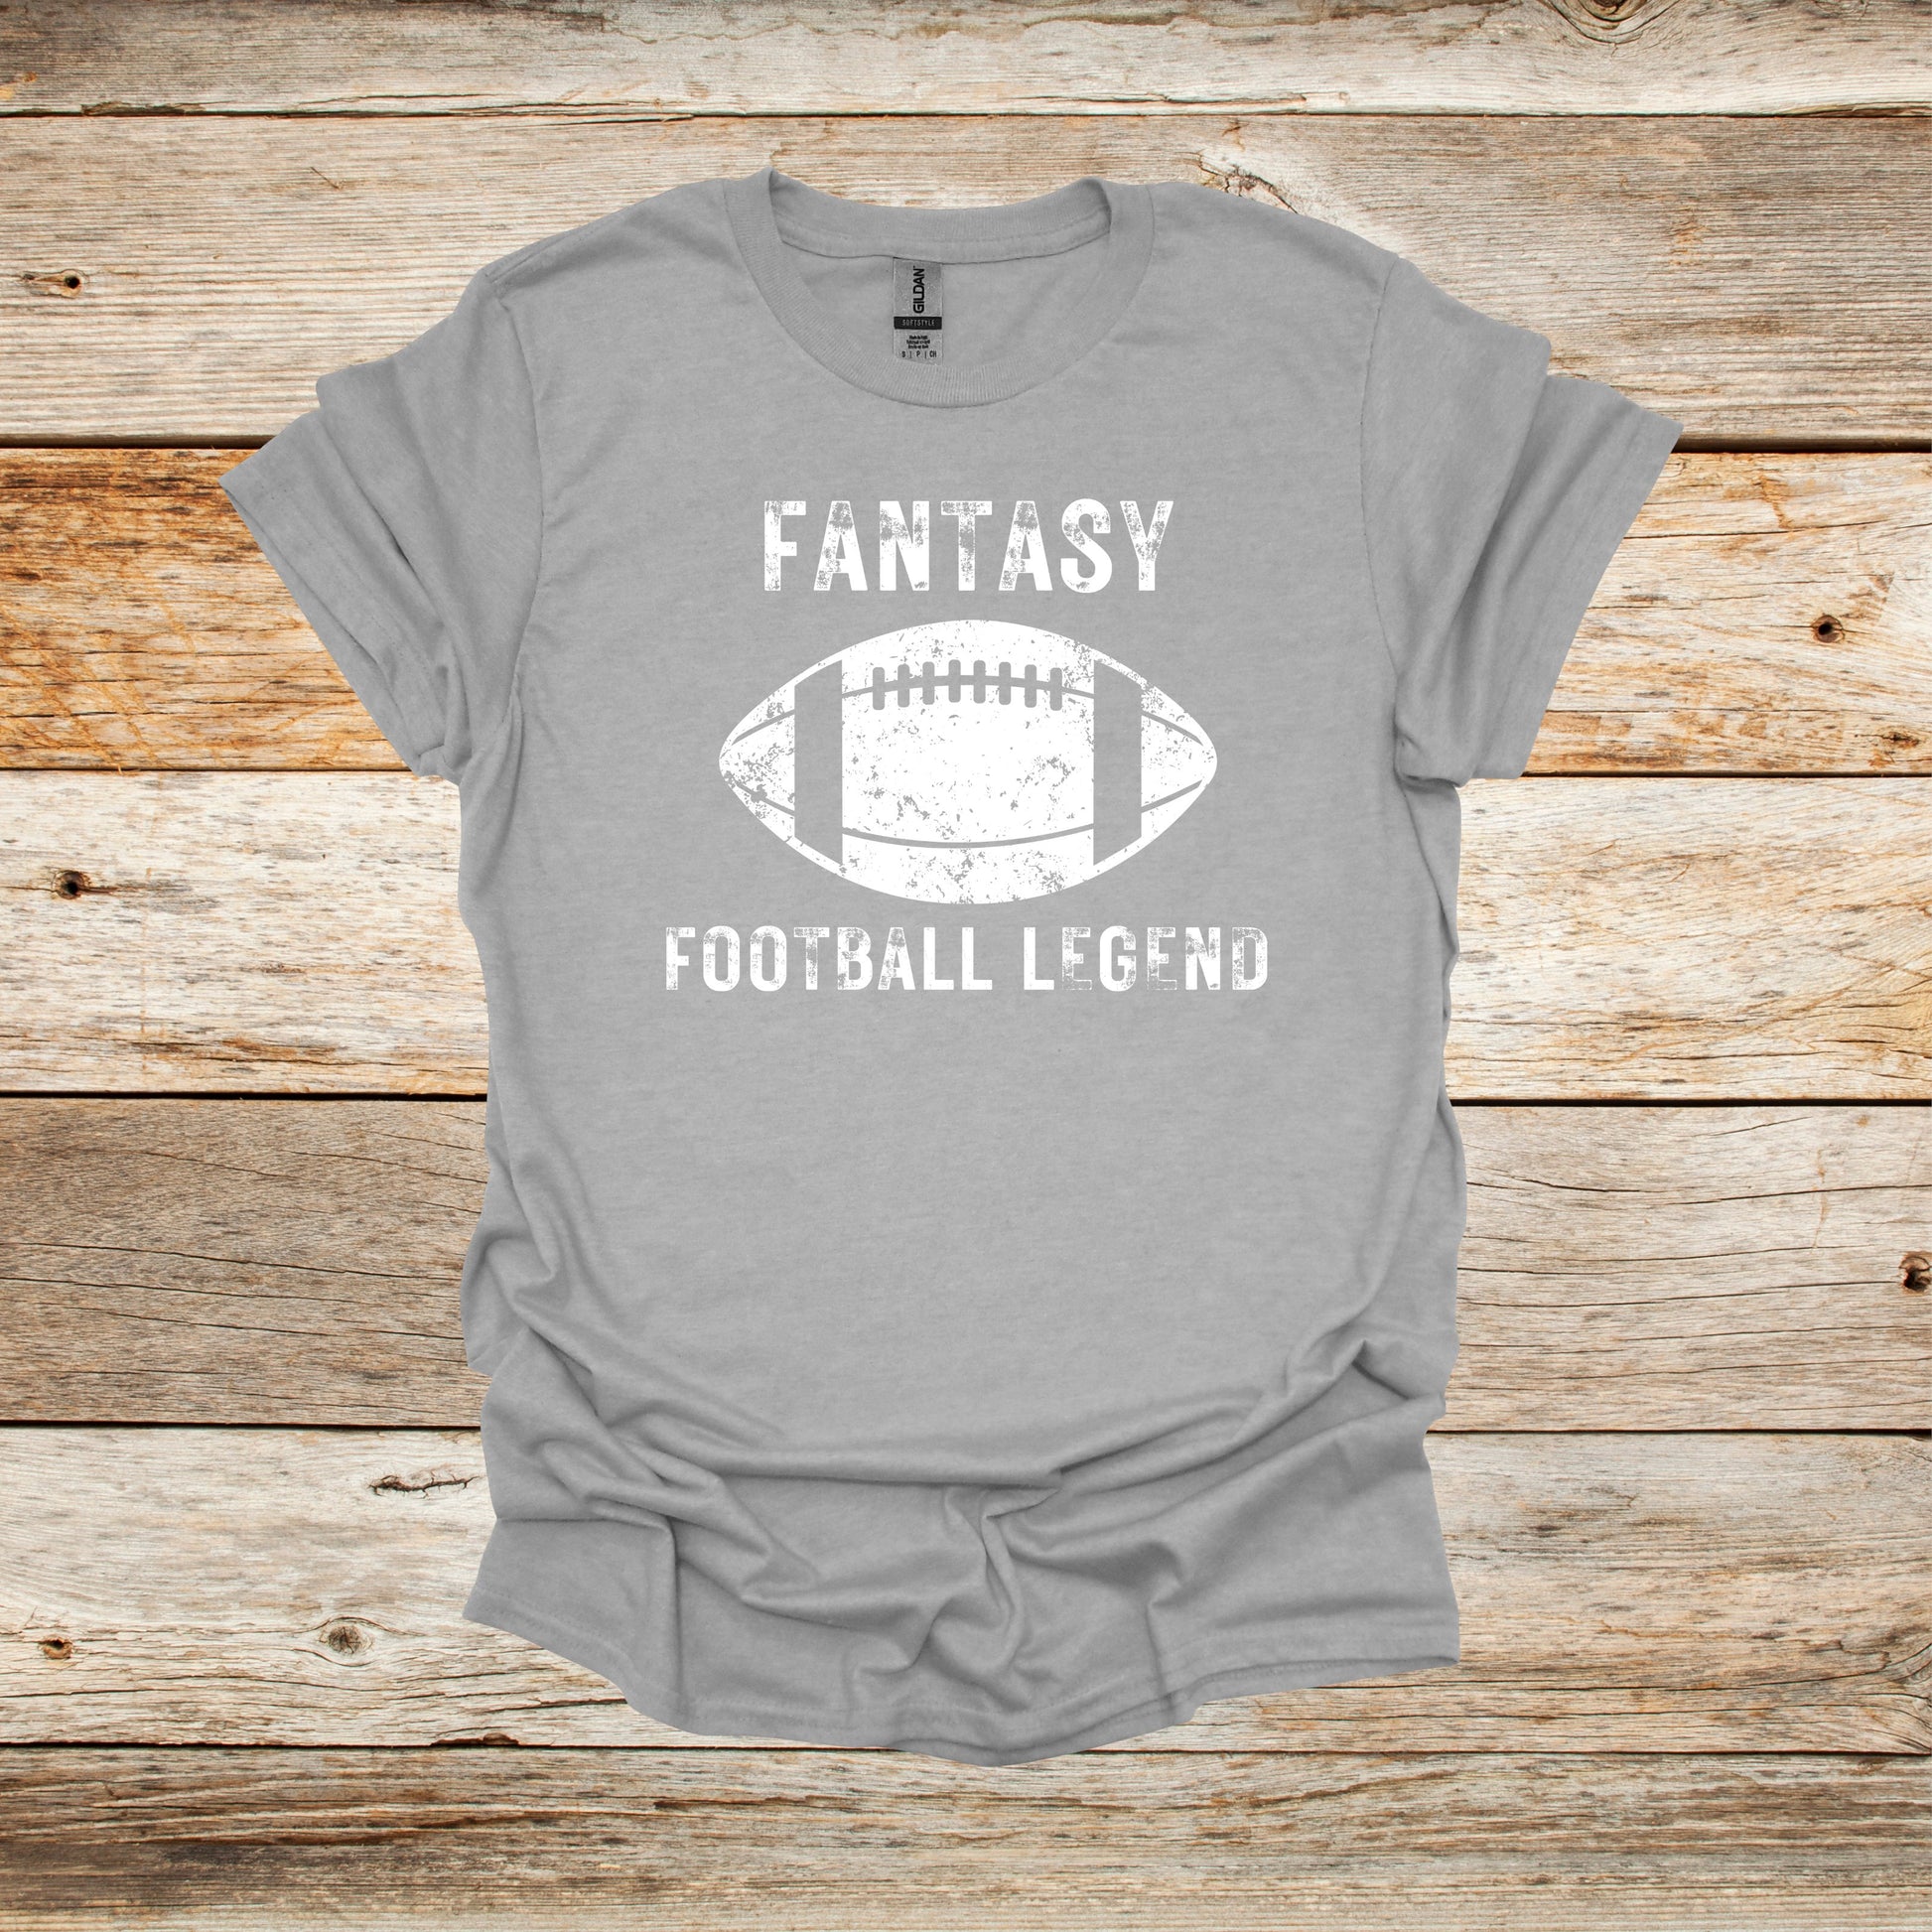 Football T-Shirt - Adult and Children's Tee Shirts - Fantasy Football - Sports T-Shirts Graphic Avenue Sport Grey Adult Small 